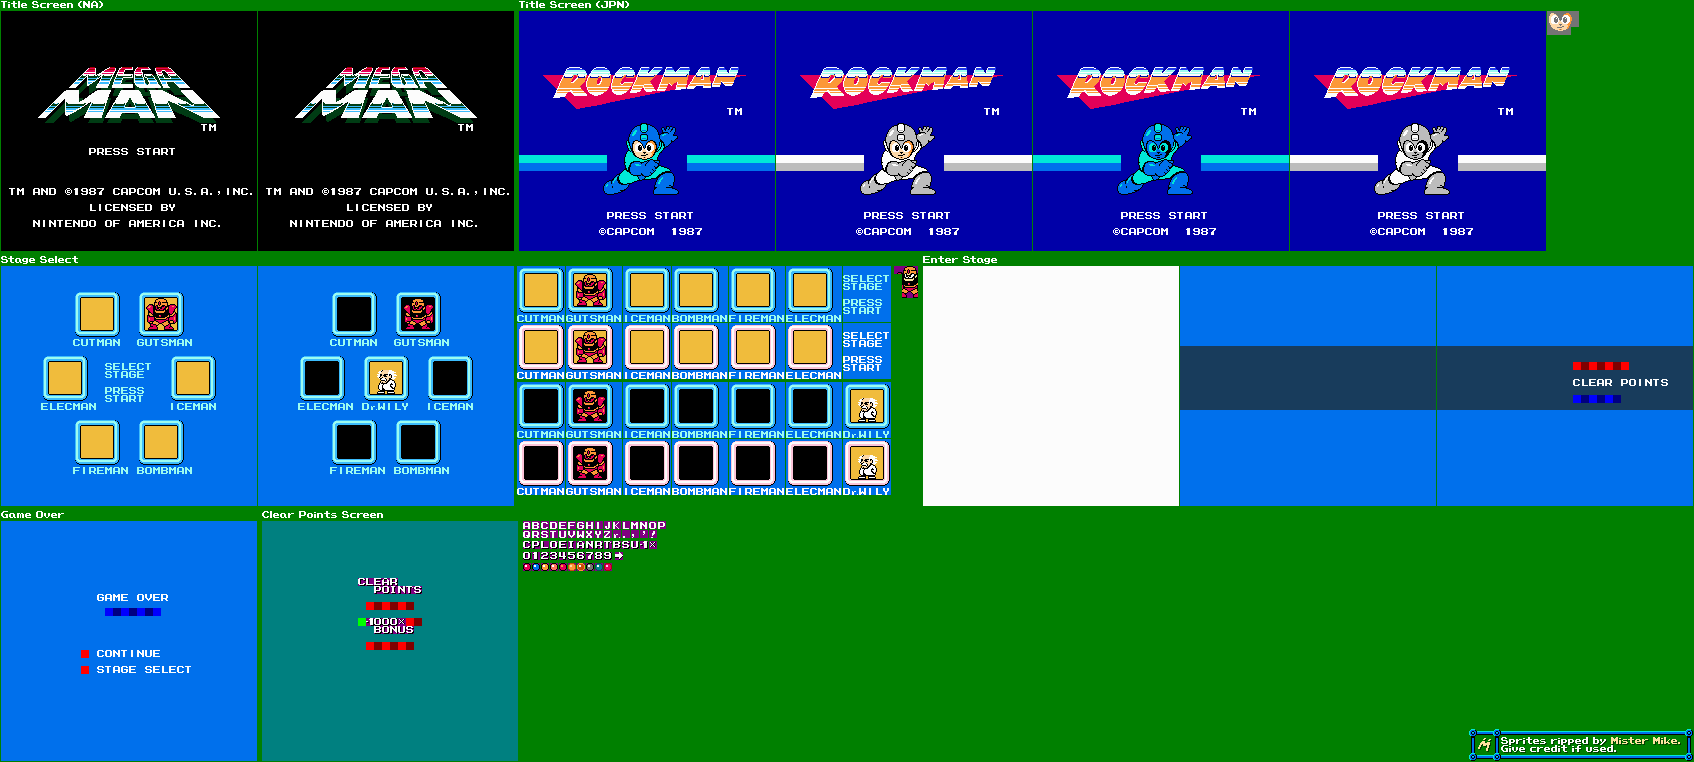 Mega Man - Title Screen, Stage Select & Game Over